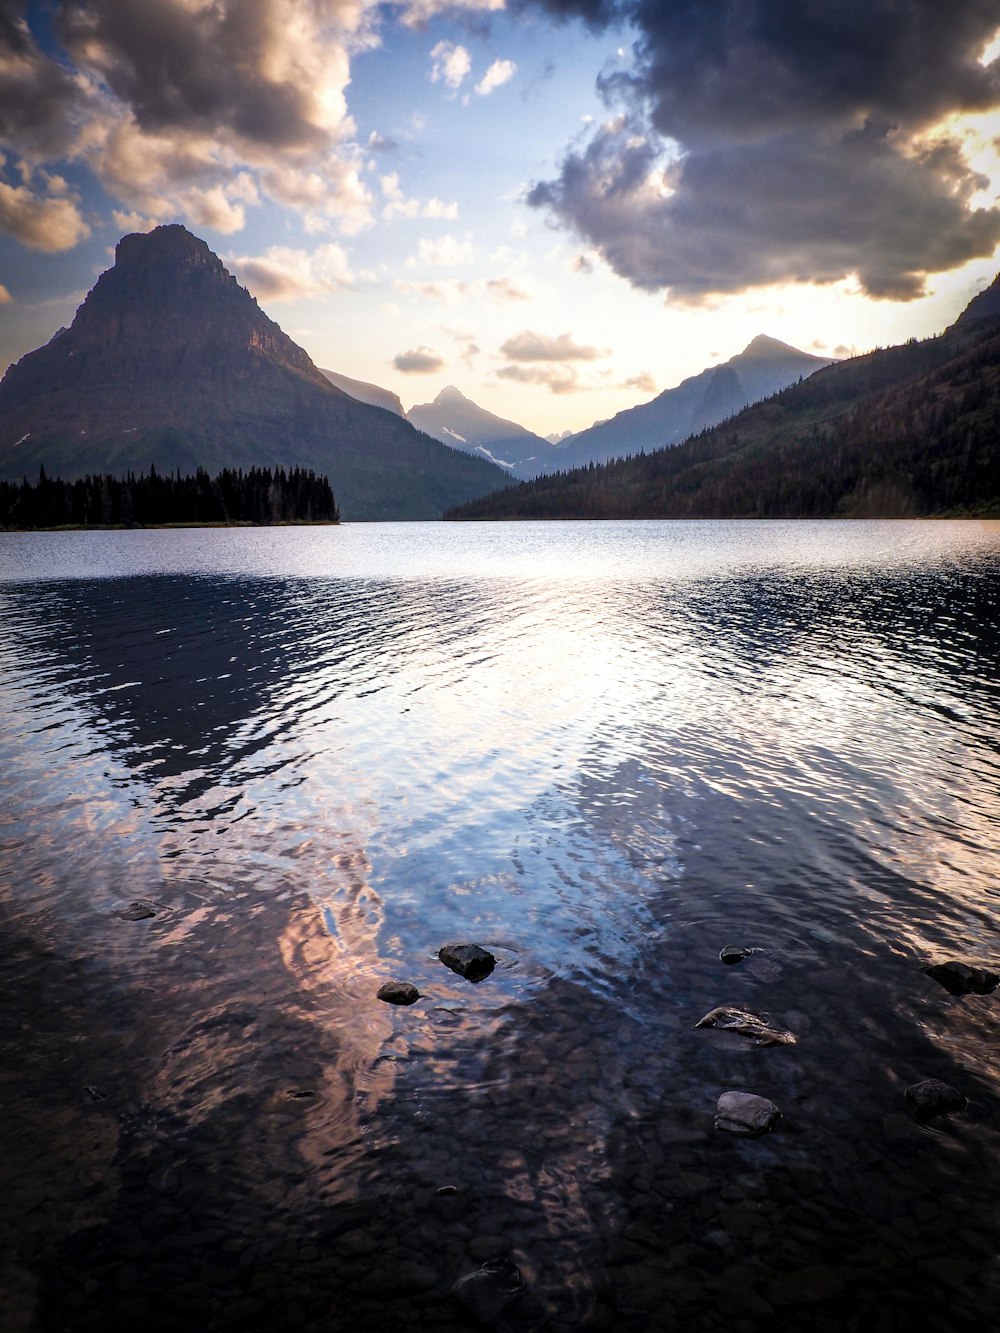 landscape photo of body of water surrounded by mountains